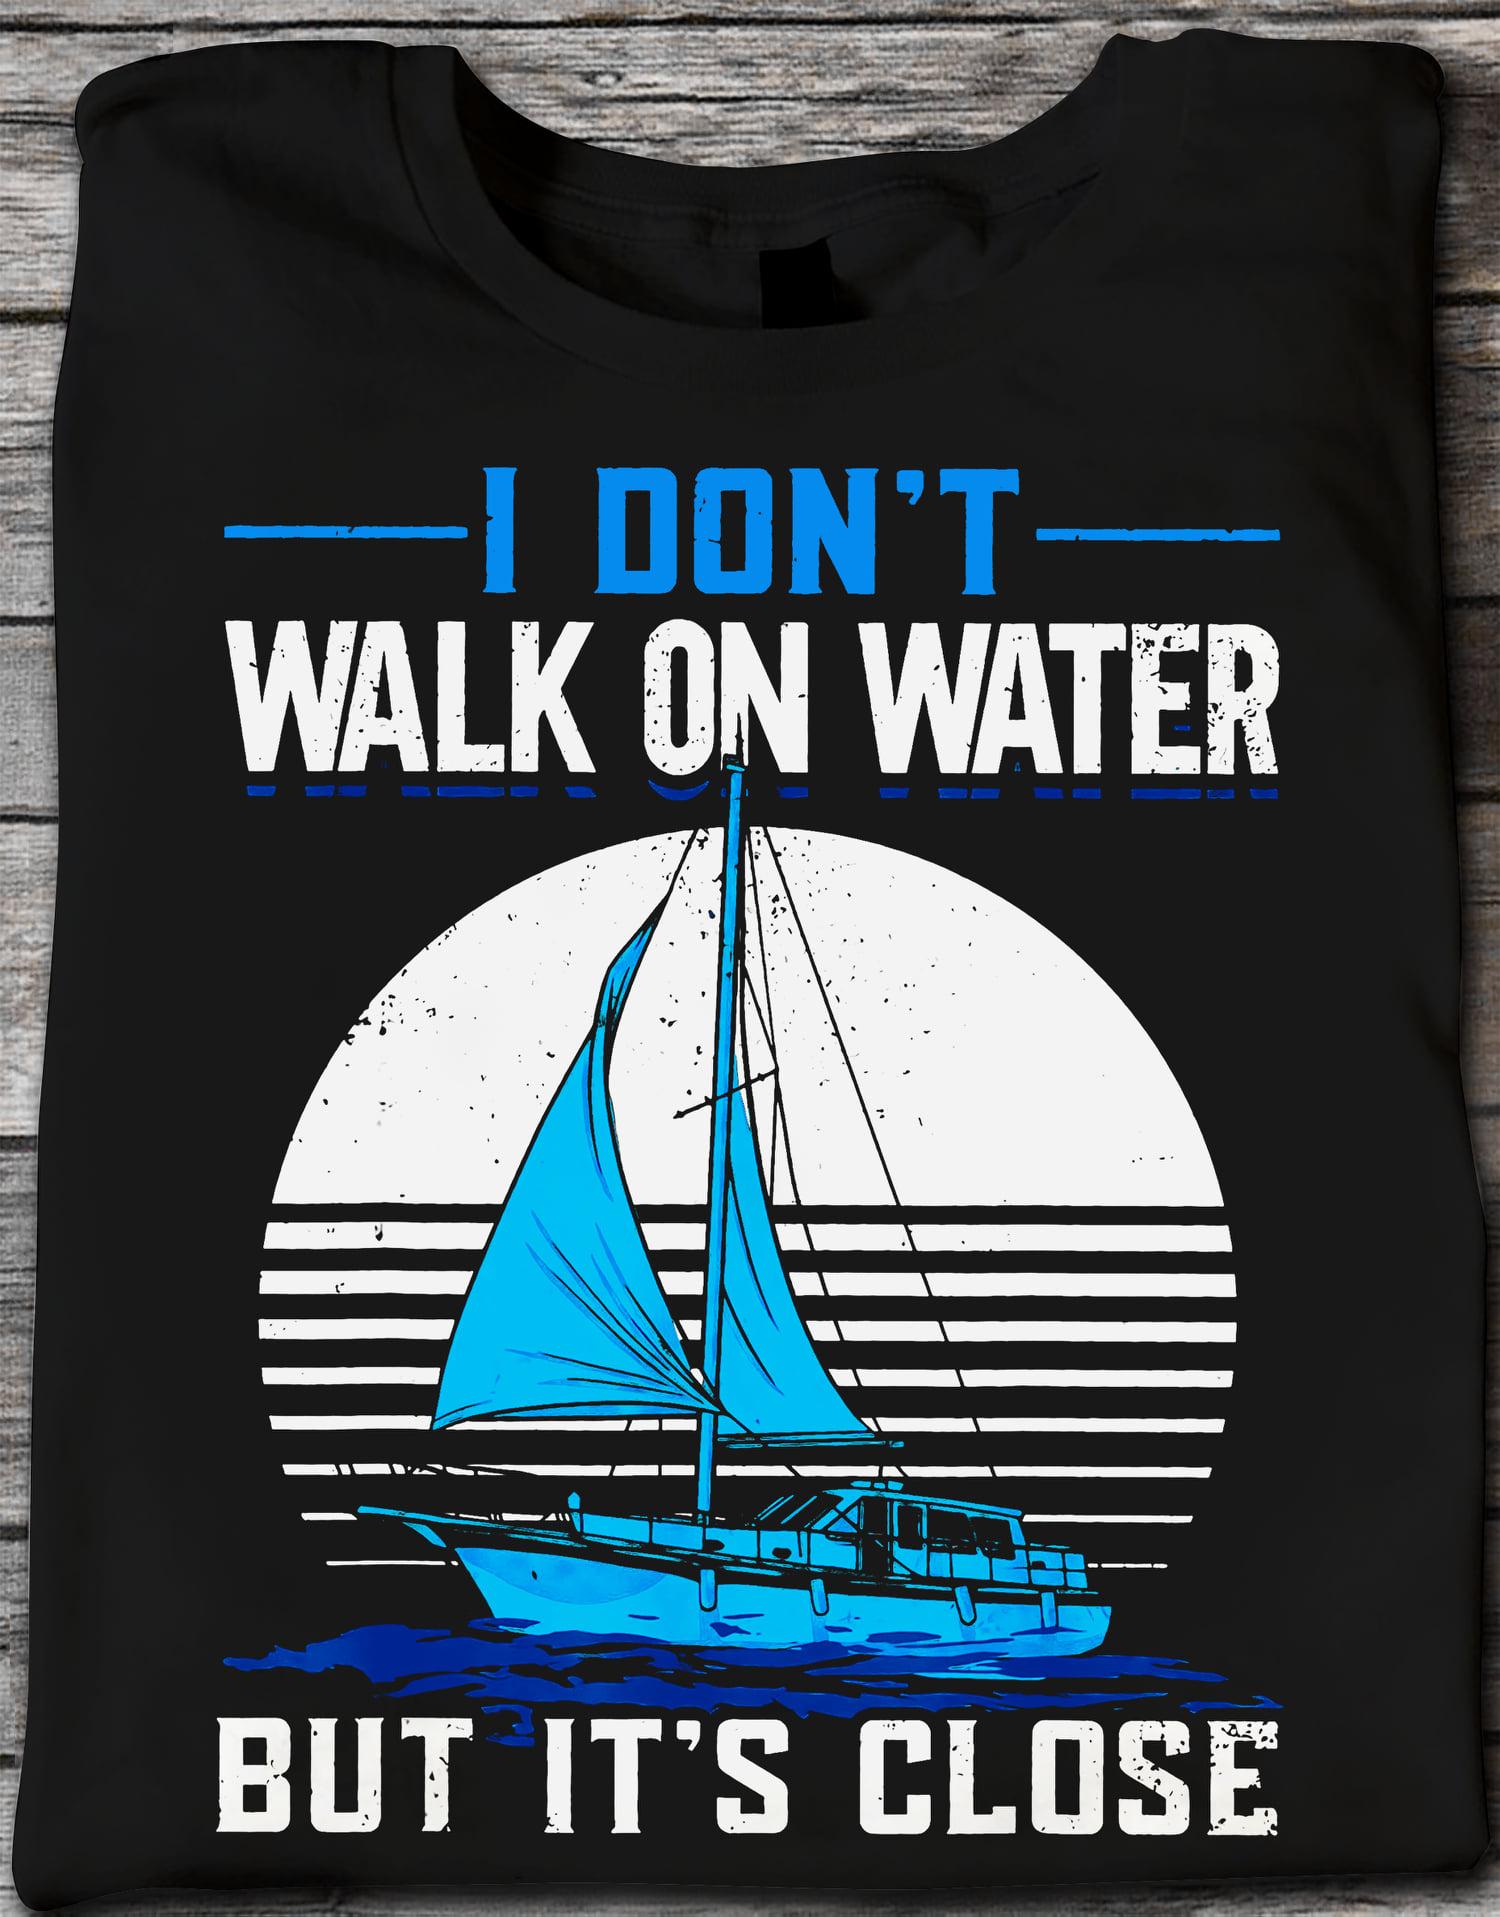 I don't walk on water but it's close - Love to go sailing, sail graphic T-shirt